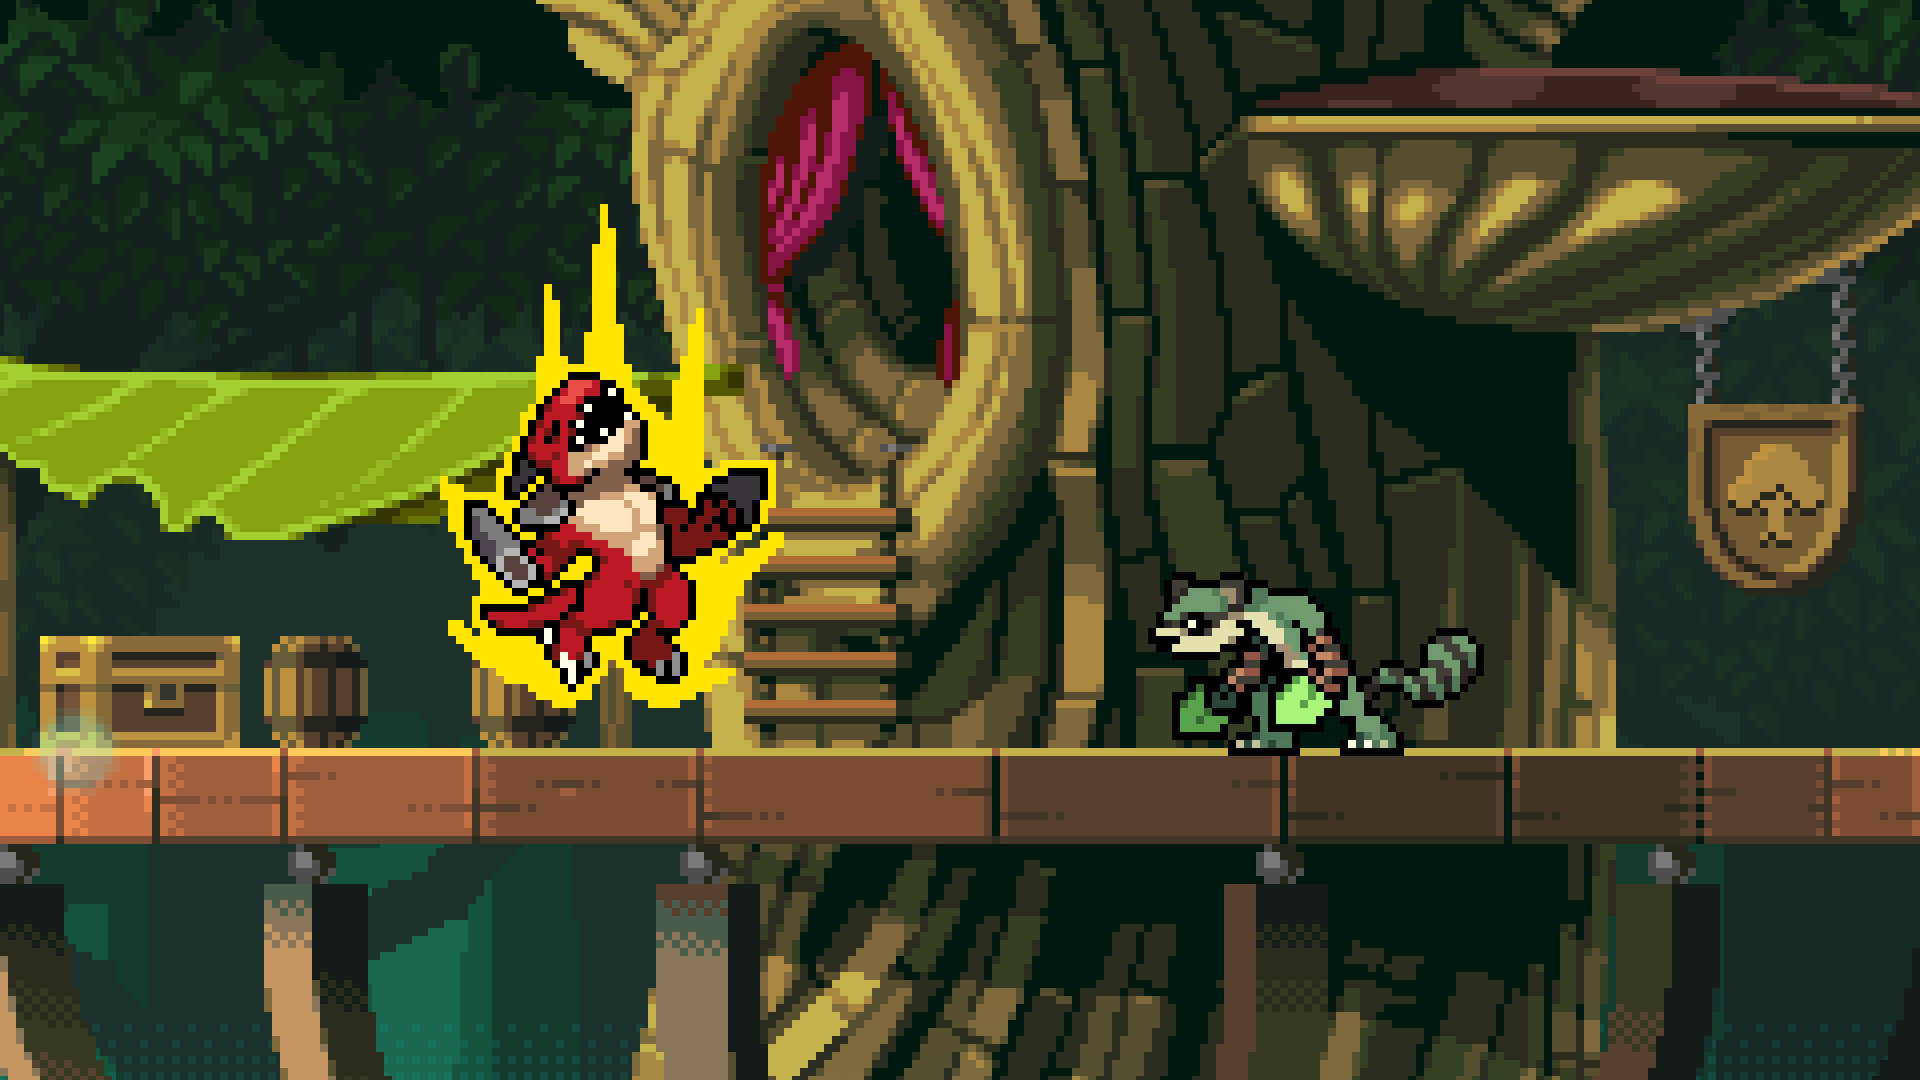 Save 60% on Rivals of Aether: Ragnir Maypul on Steam